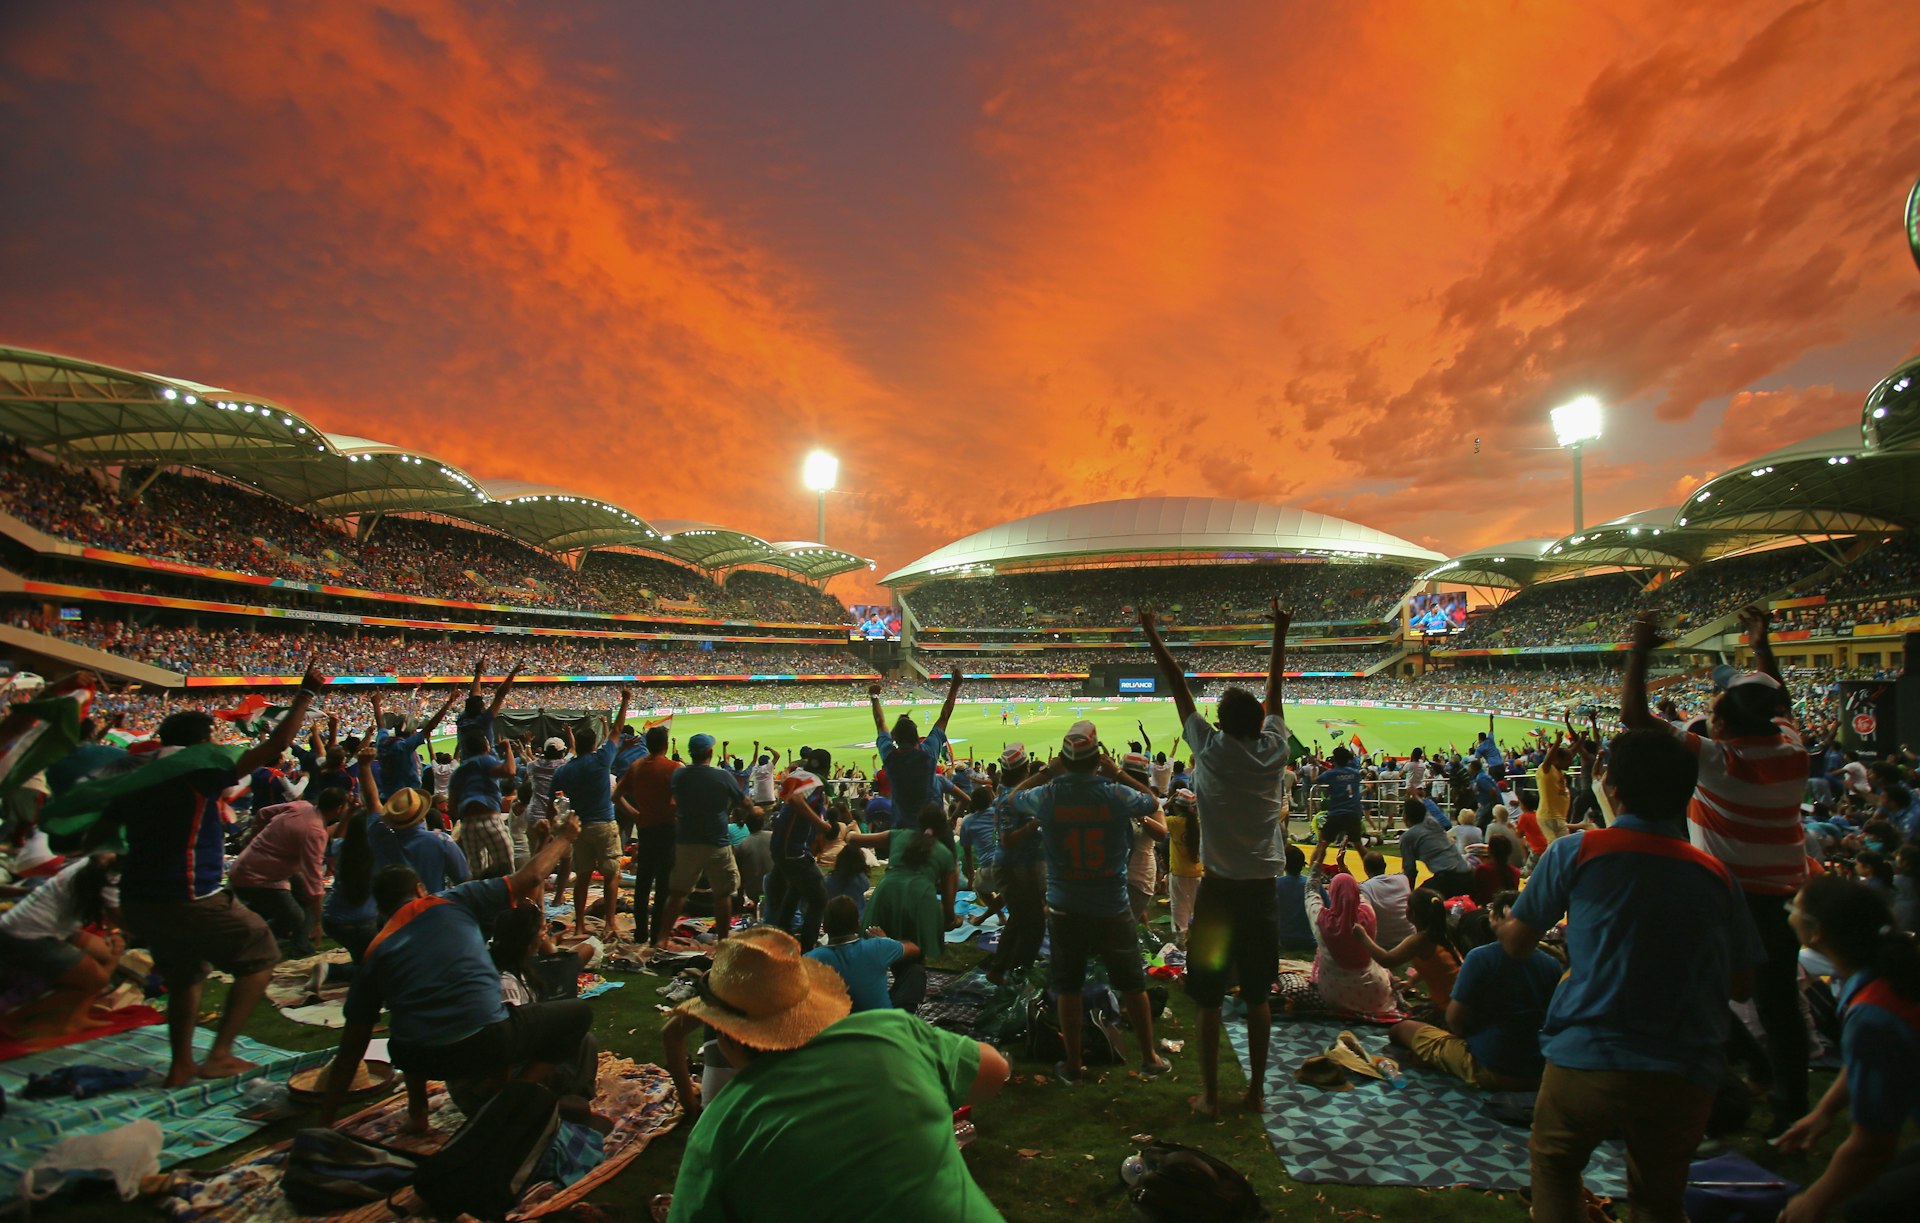 Adelaide Oval ICC Cricket 2015